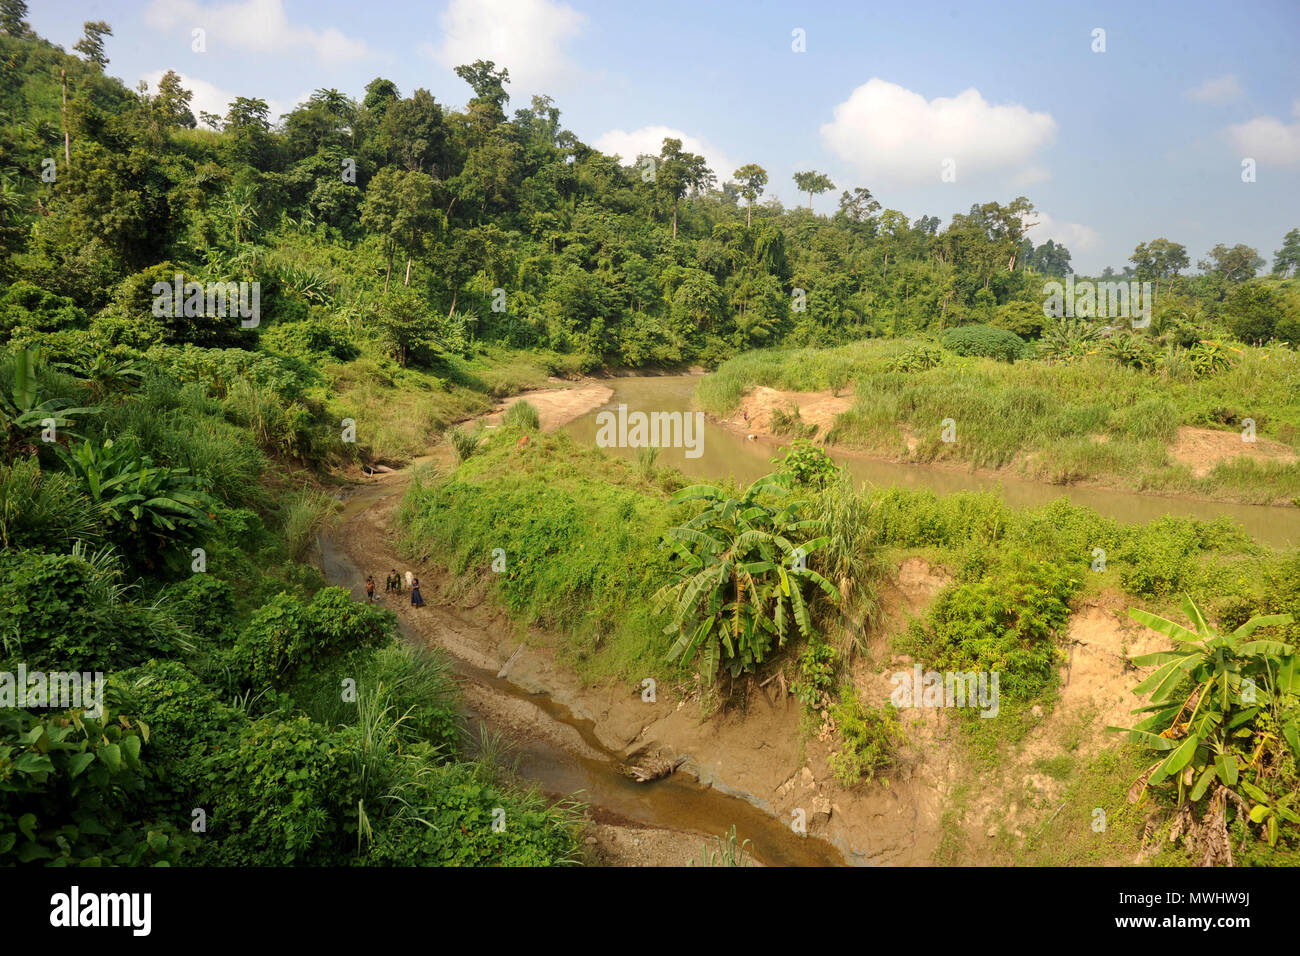 Khagrachari, Bangladesh - October 16, 2011: The Landscape view of Khagrachari is regarded as one of the most attractive travel destinations in Banglad Stock Photo